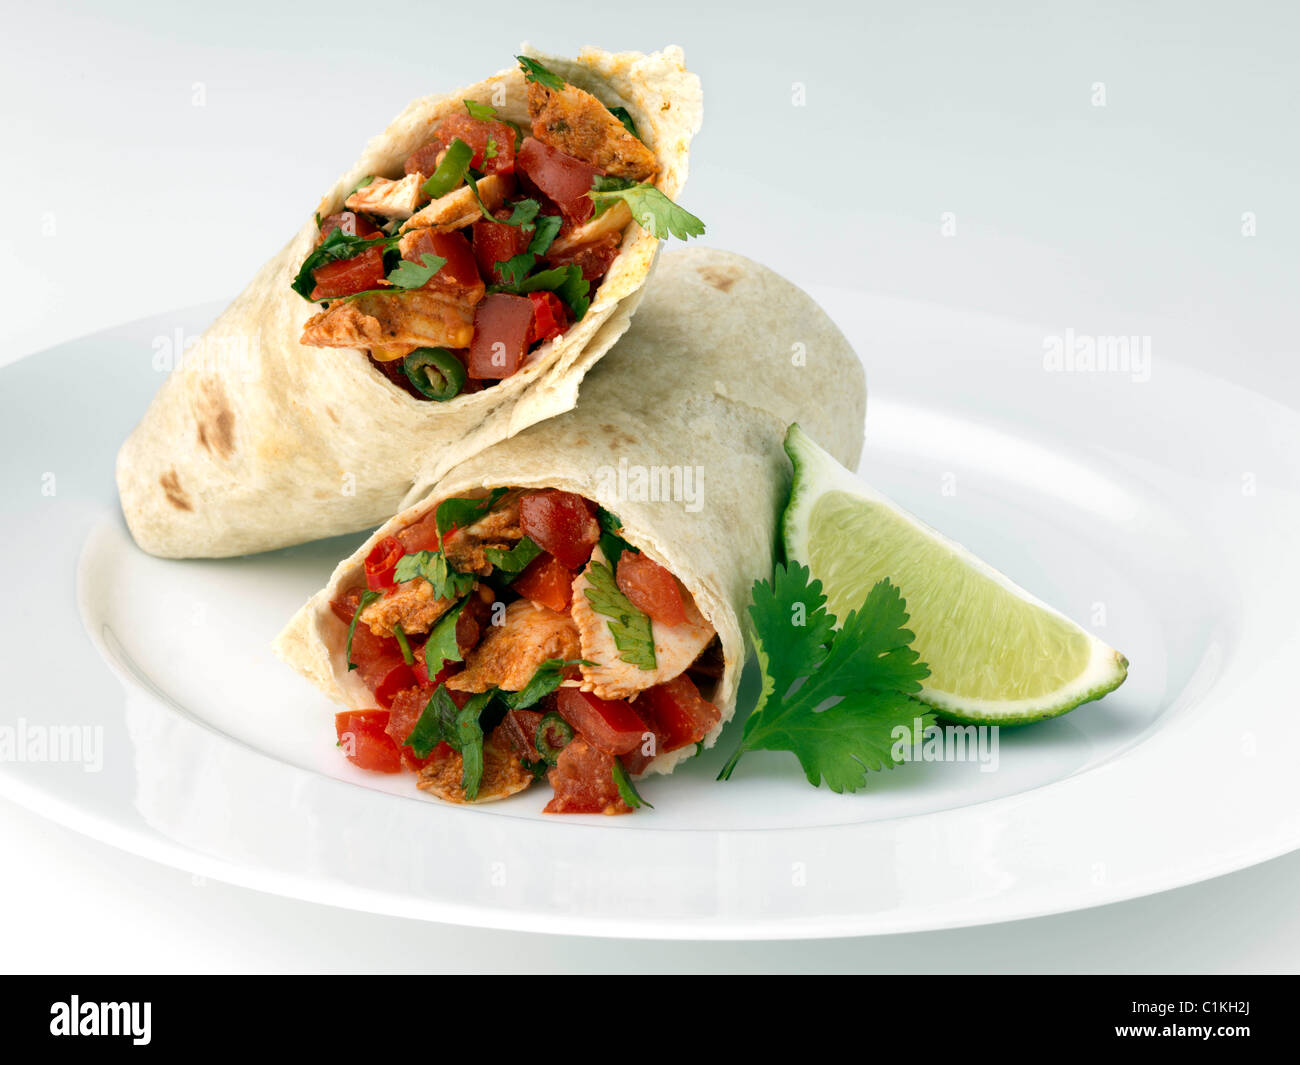 Spicy chicken burrito Mexican main meal Stock Photo